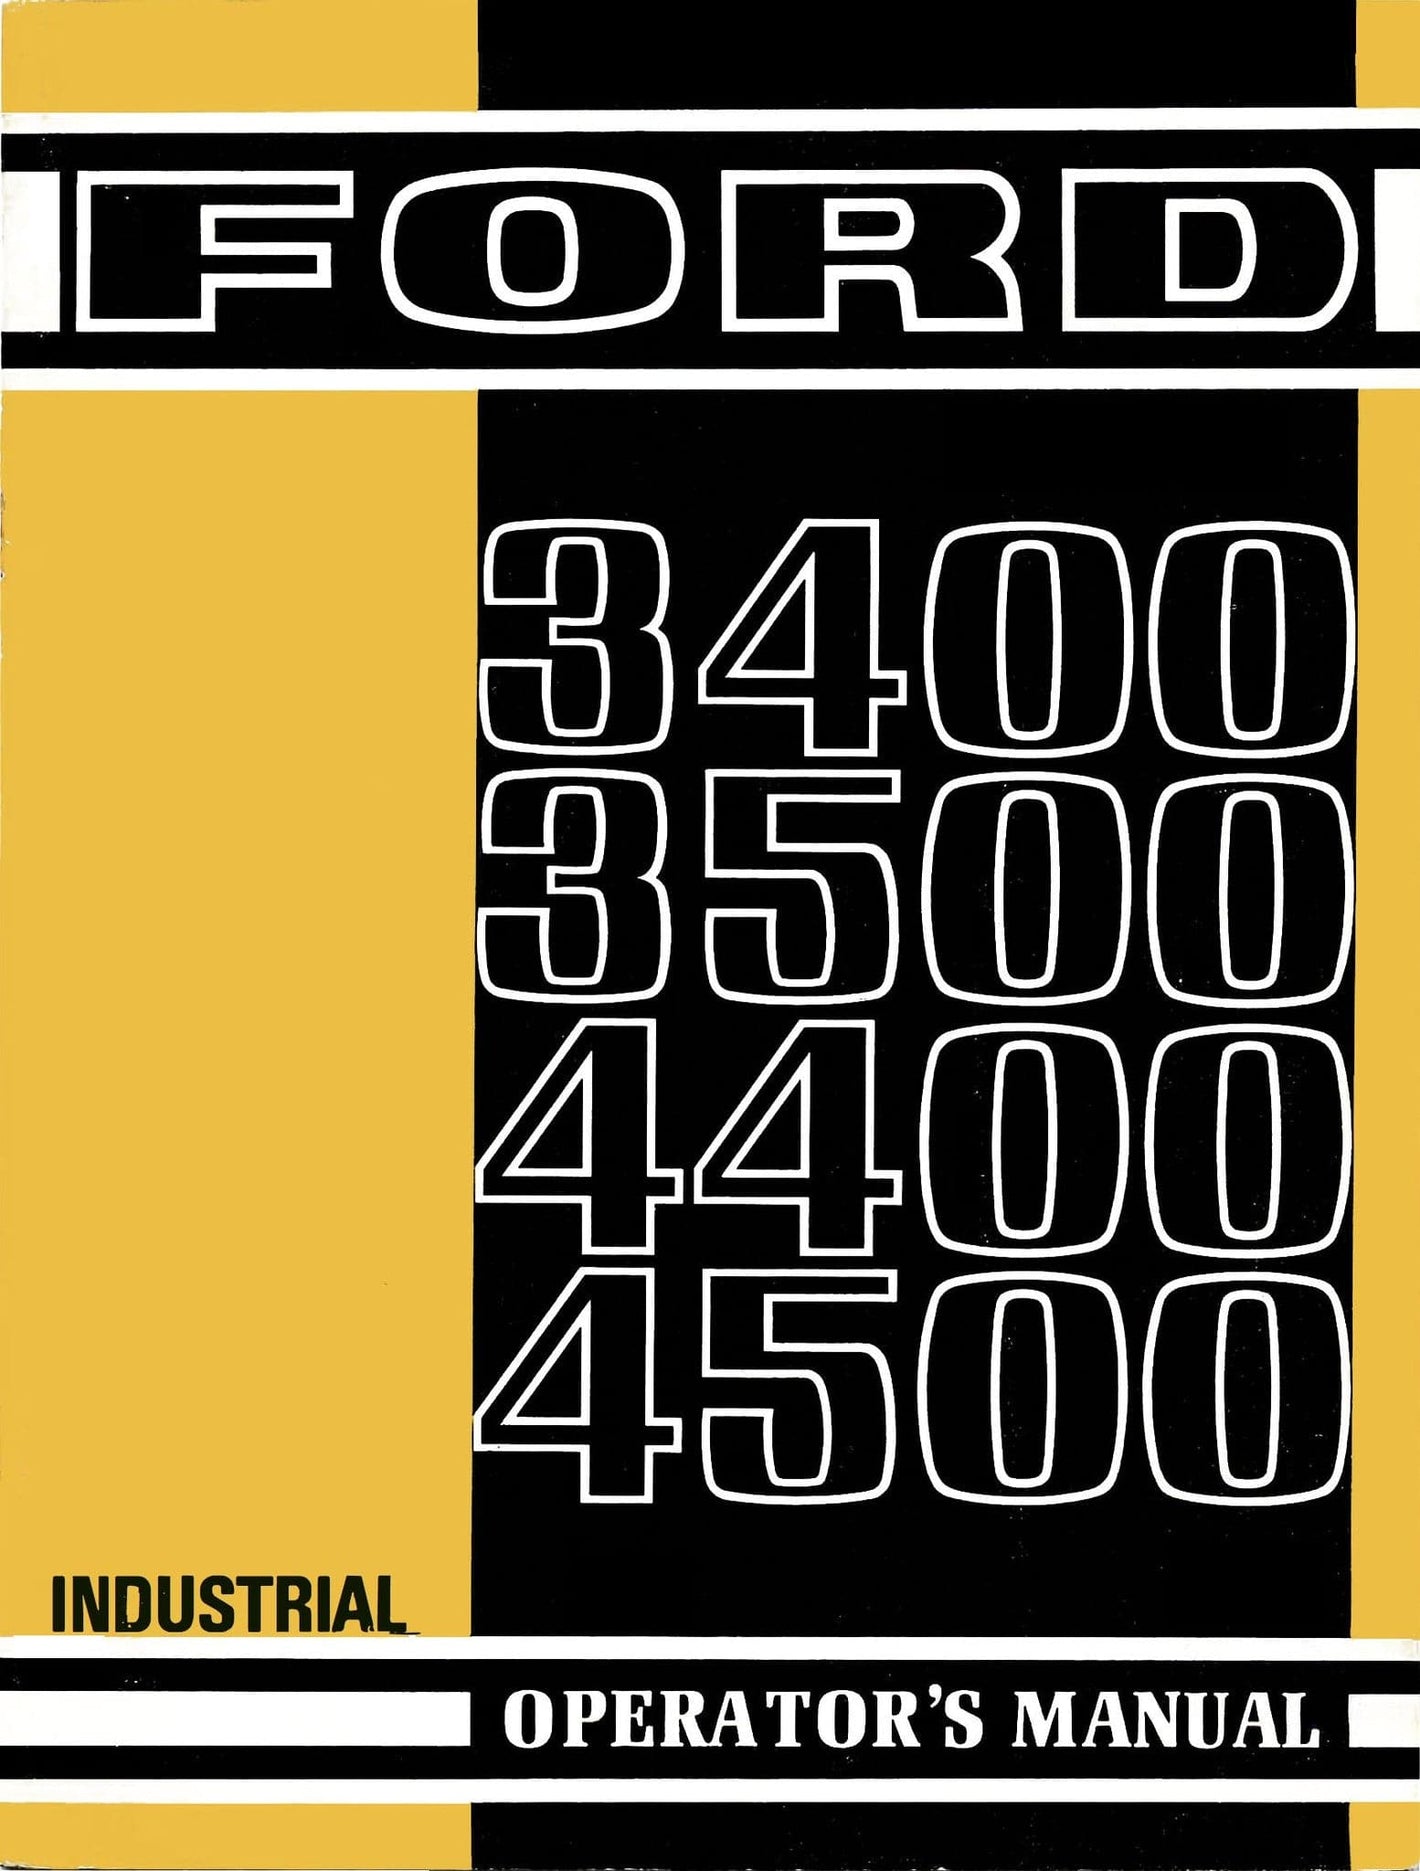 Ford 3400, 3500, 4400, 4500 Industrial Tractors - Operator's Manual